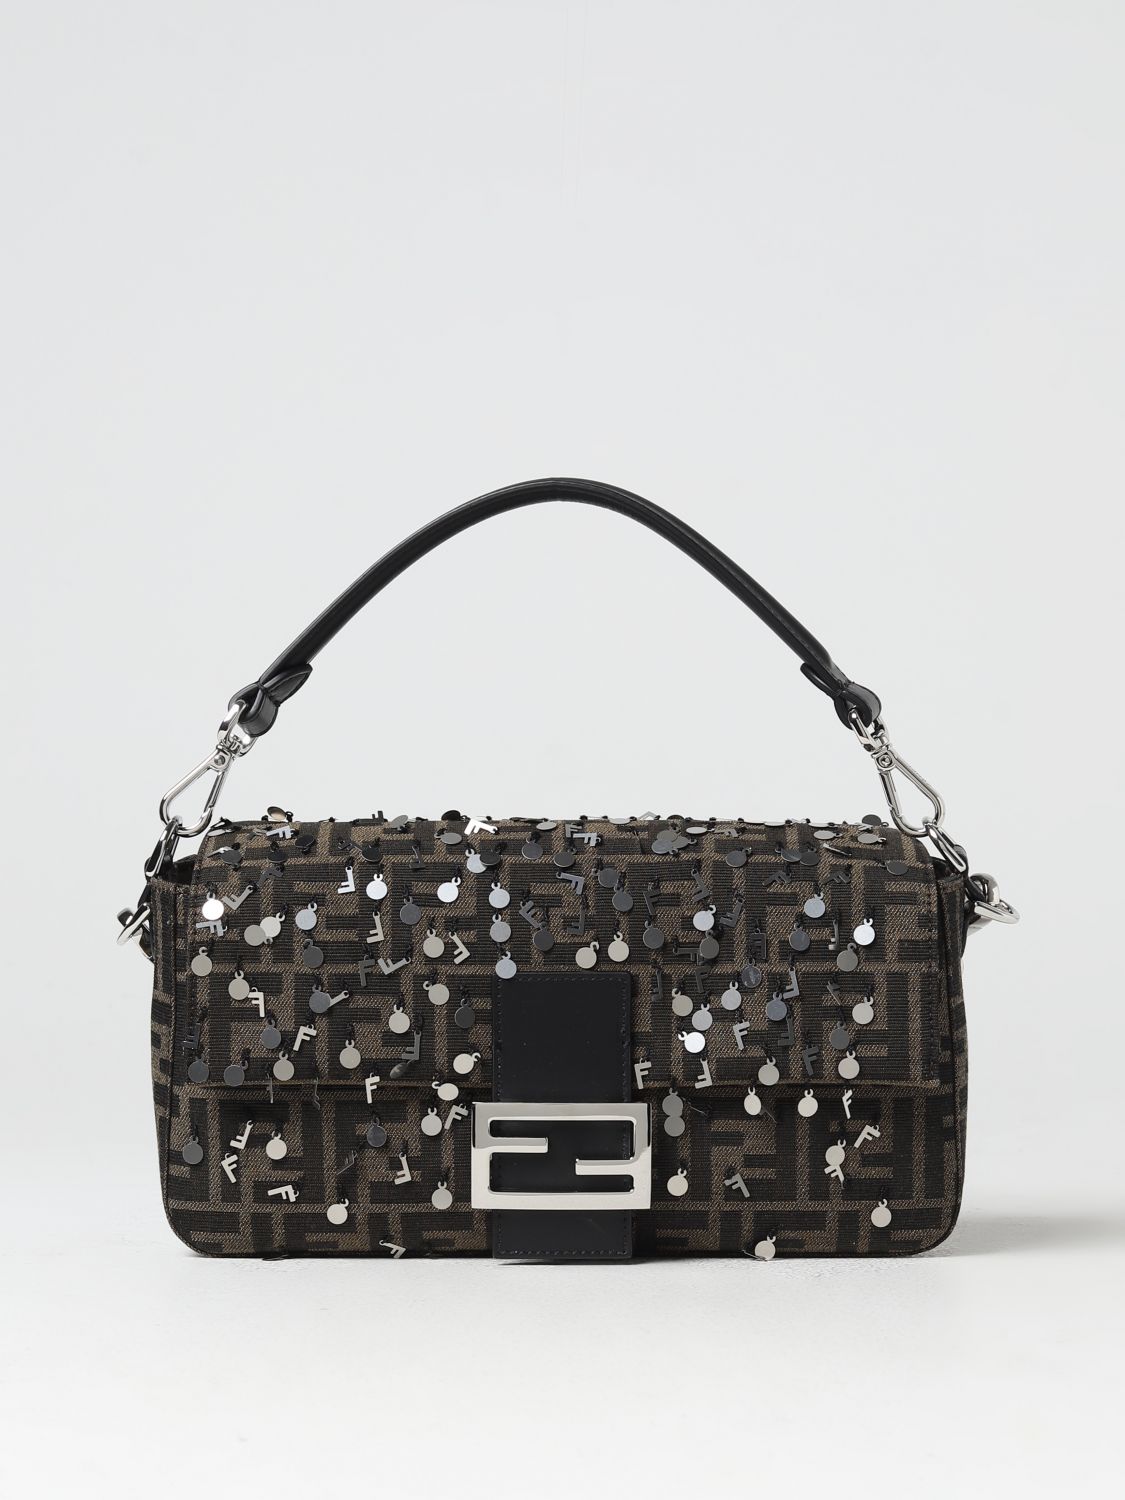 FENDI BAGUETTE BAG IN FABRIC WITH FF JACQUARD PATTERN AND SEQUINS,392243094